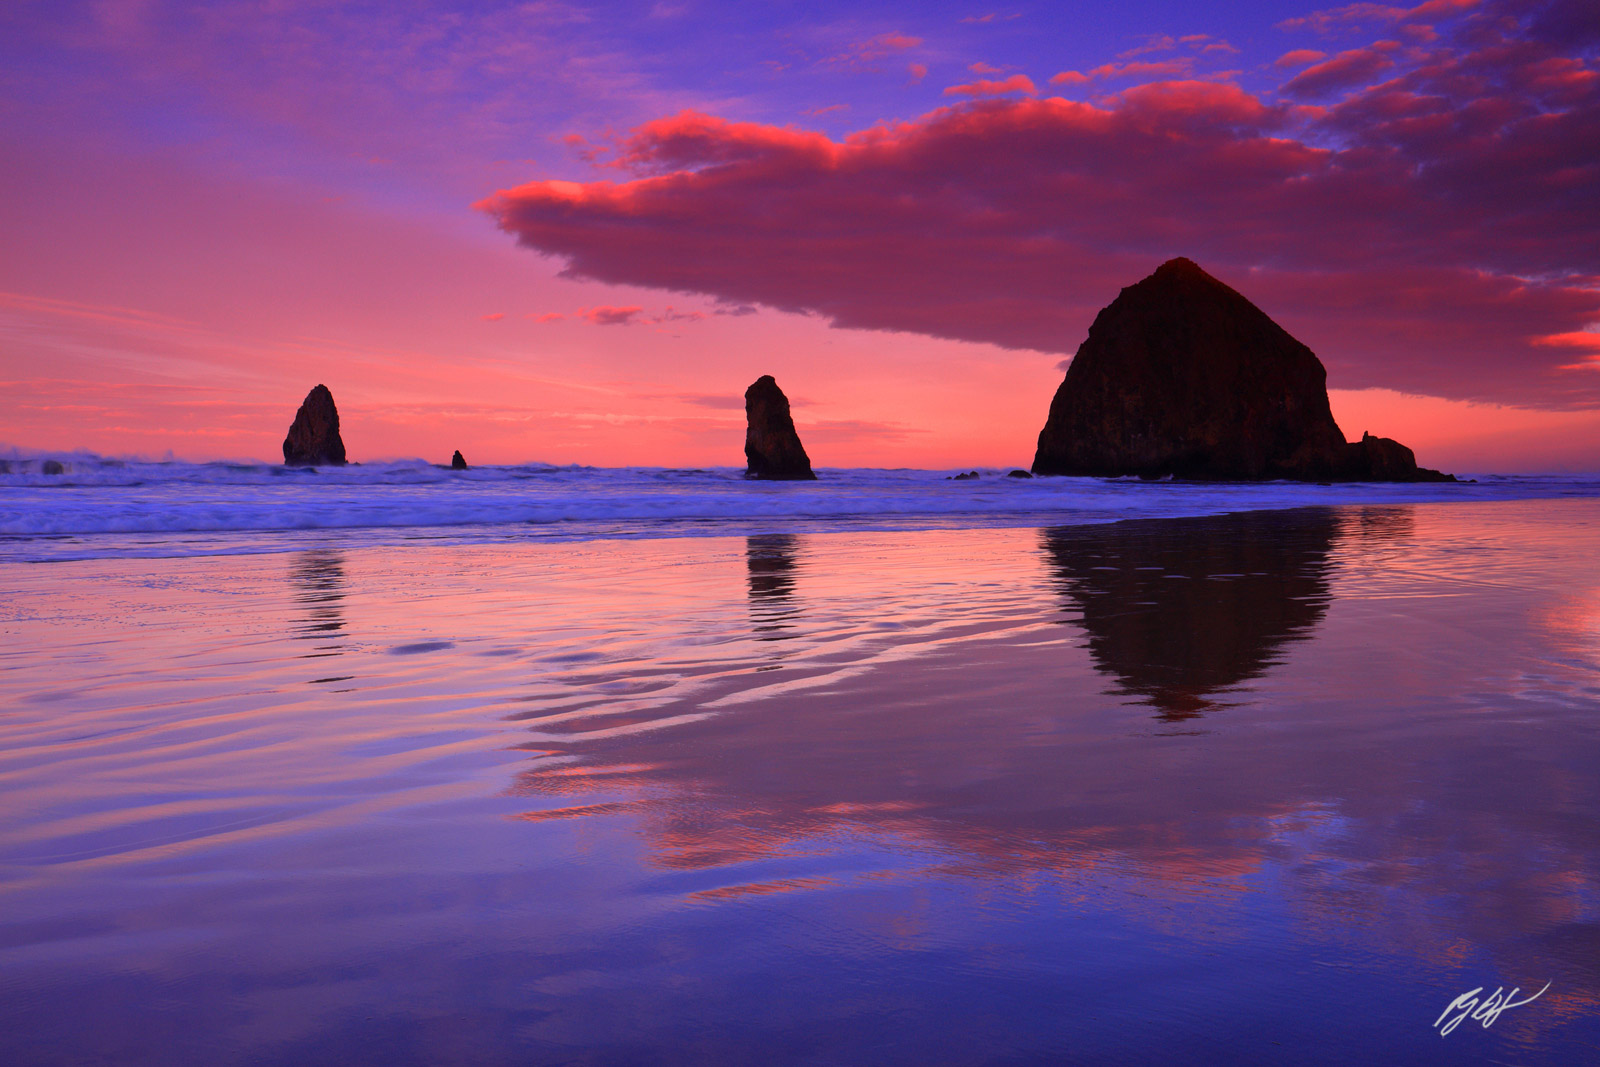 Sunrise and cloud Reflections with Haystack Rock and the Needles from Cannon Beach on the Oregon Coast